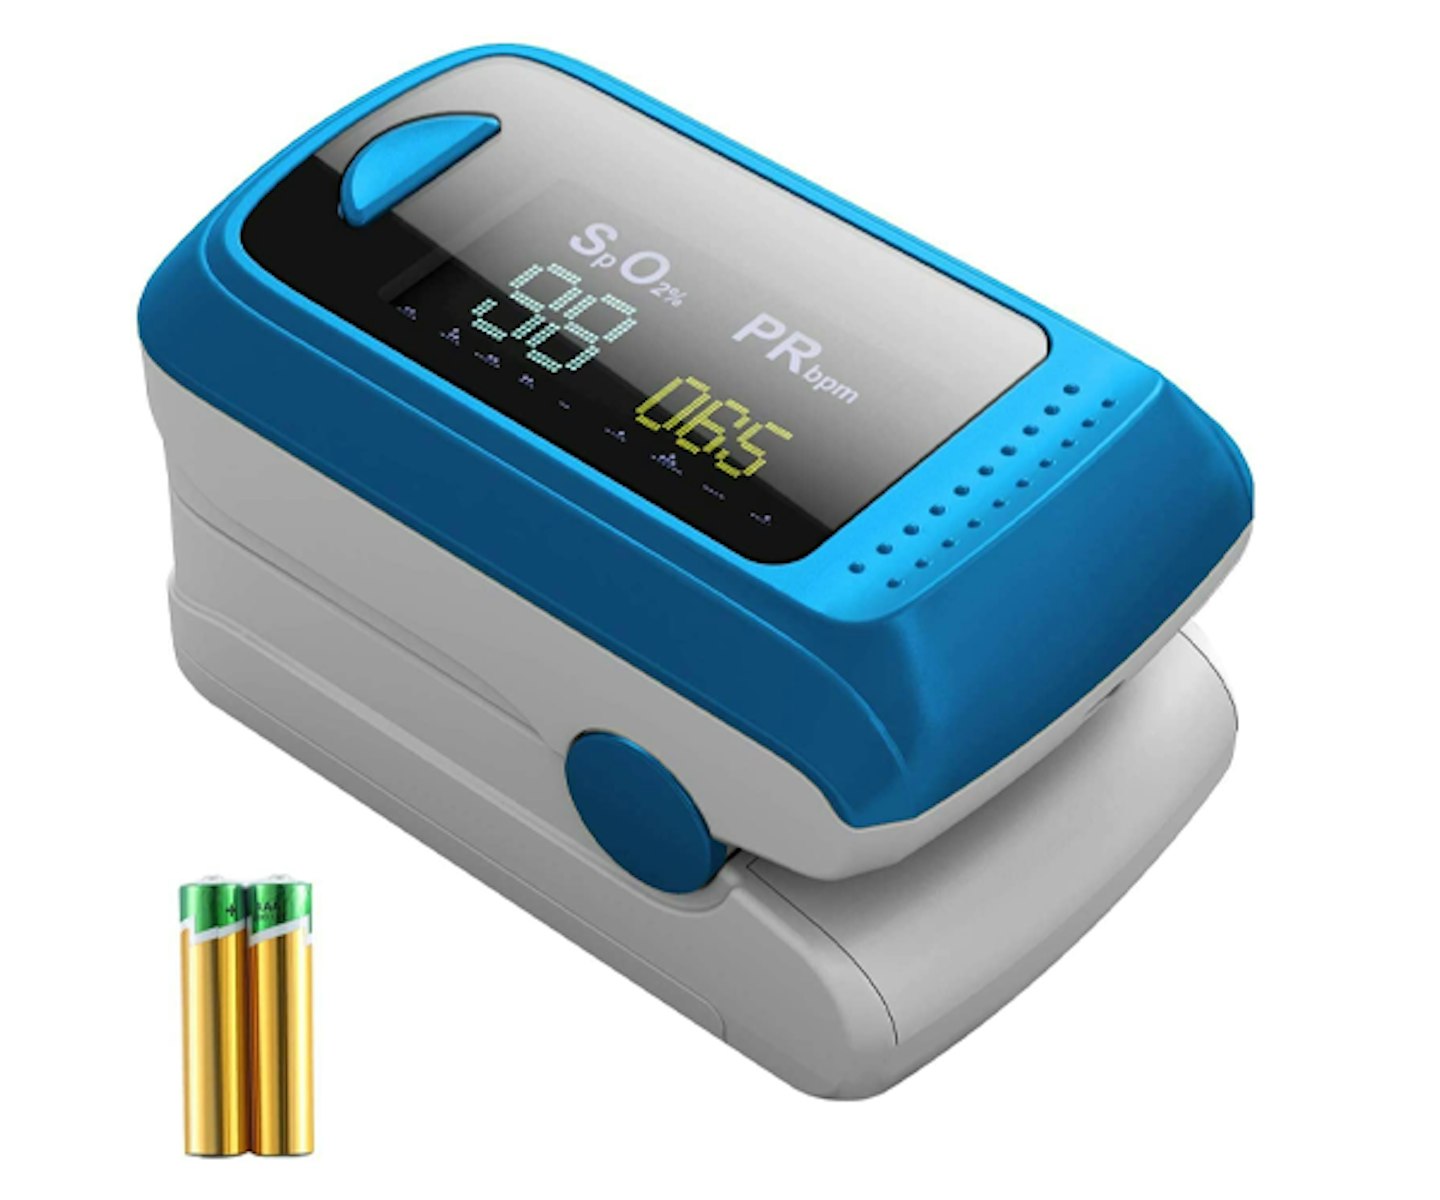 https://images.bauerhosting.com/legacy/media/624a/b6e7/a4bf/4971/5e11/52fe/Pulse%20Oximeter%20NHS%20Approved%20UK.png?auto=format&w=1440&q=80